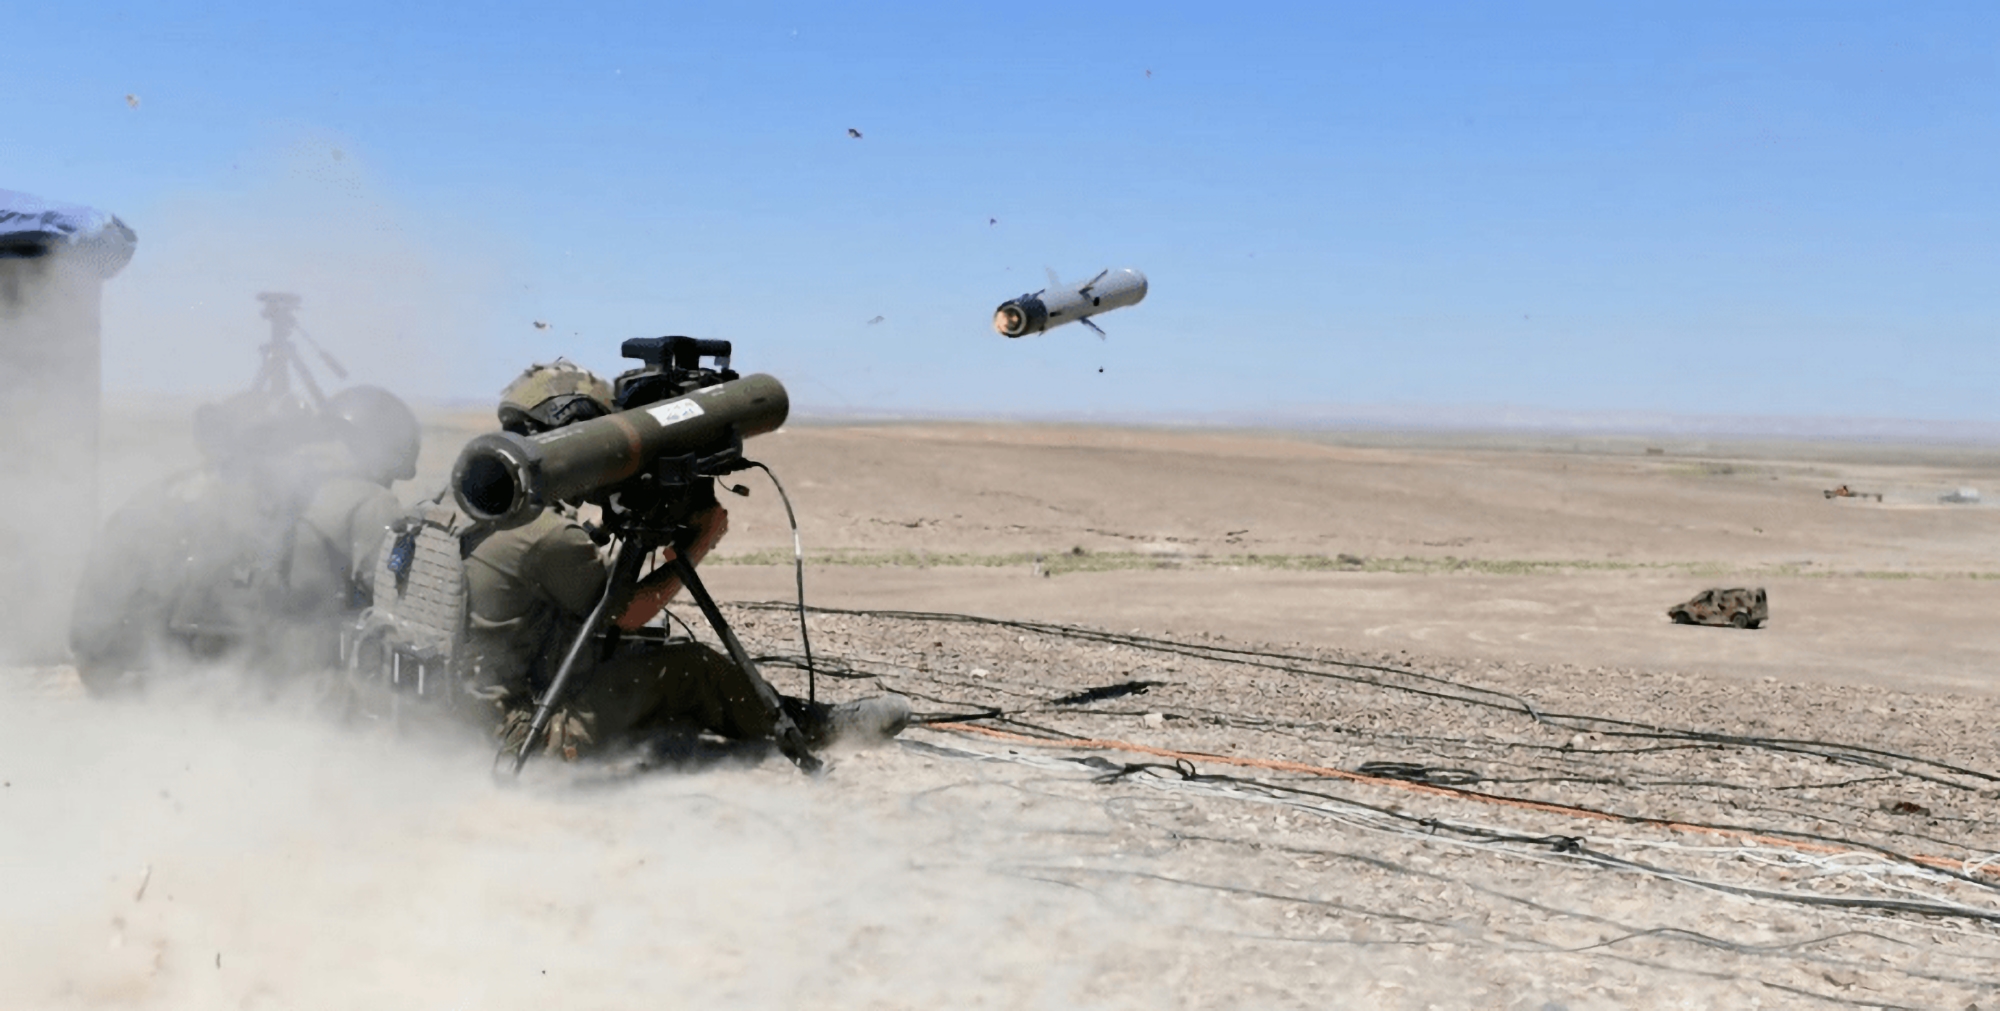 Slovenia buys Spike LR2 anti-tank missile systems for 6,670,000 euros